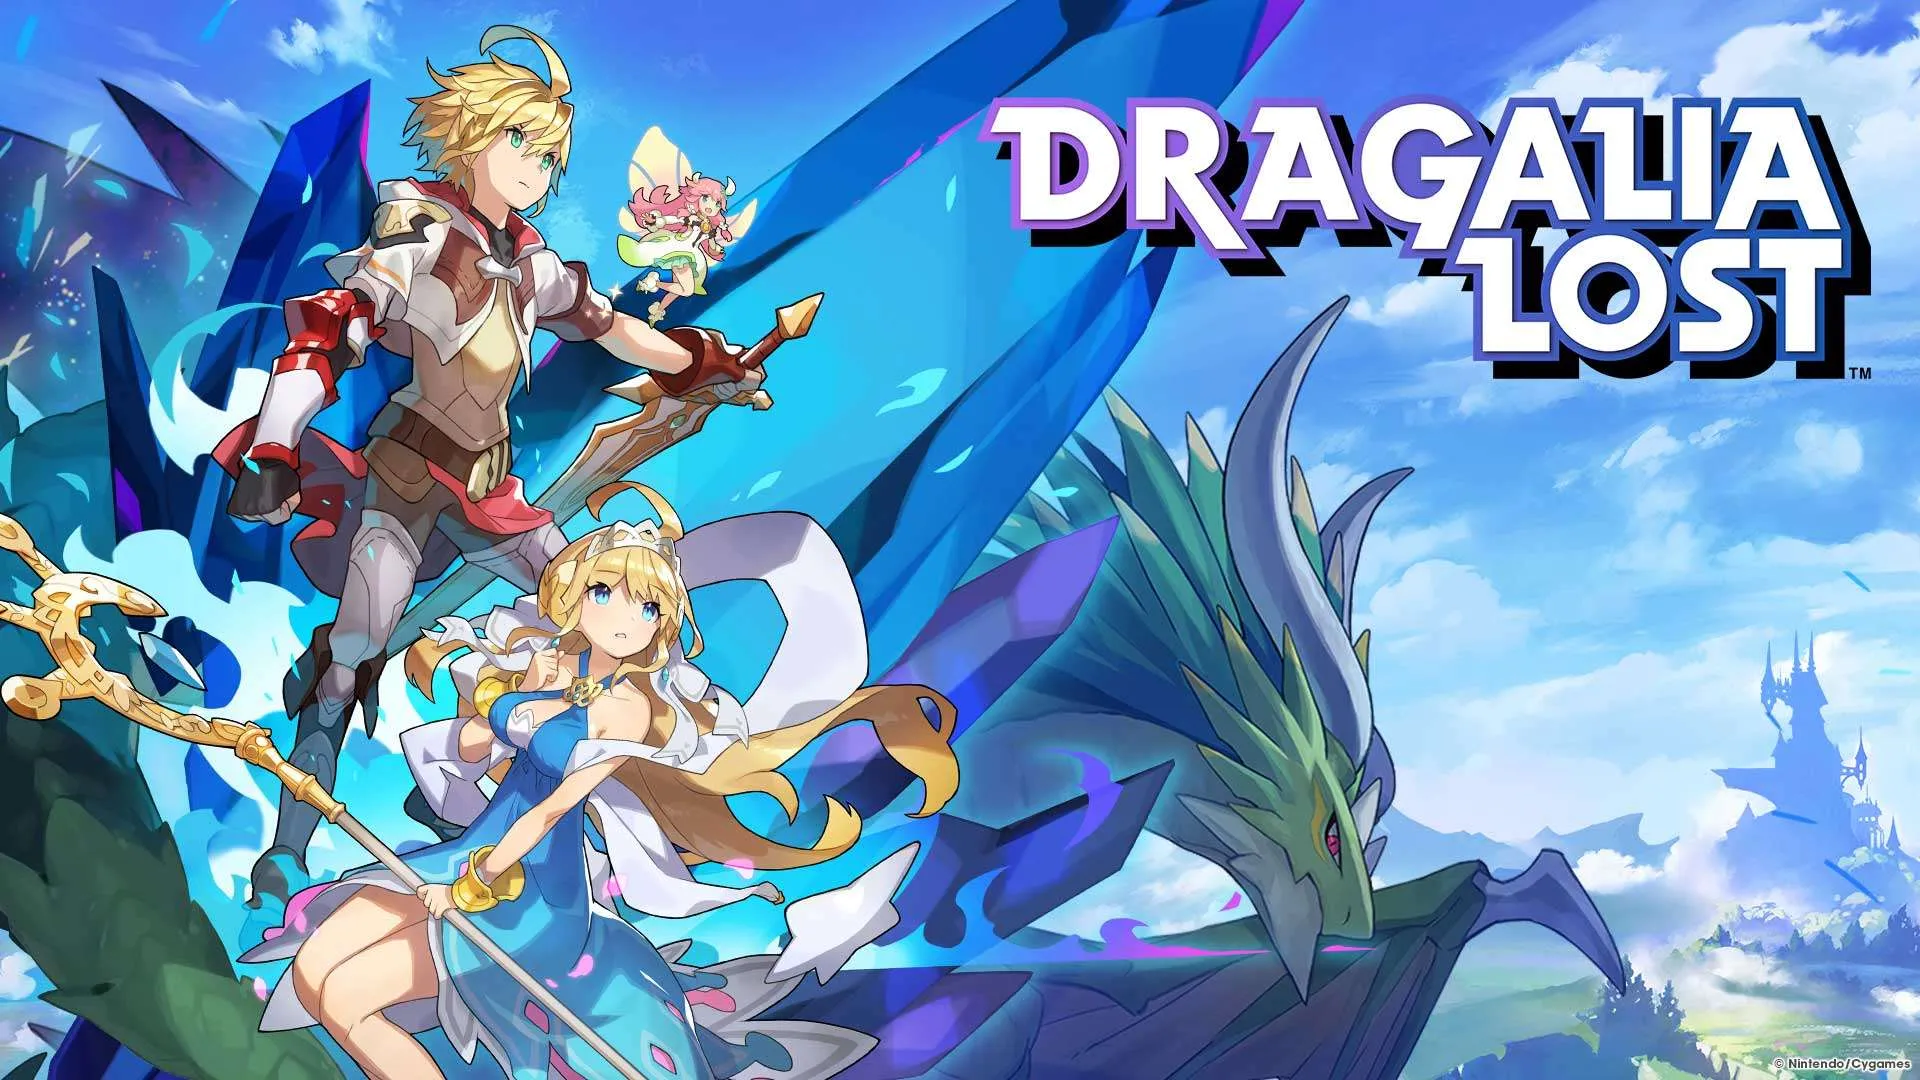 Nintendo is ending support for Dragalia Lost